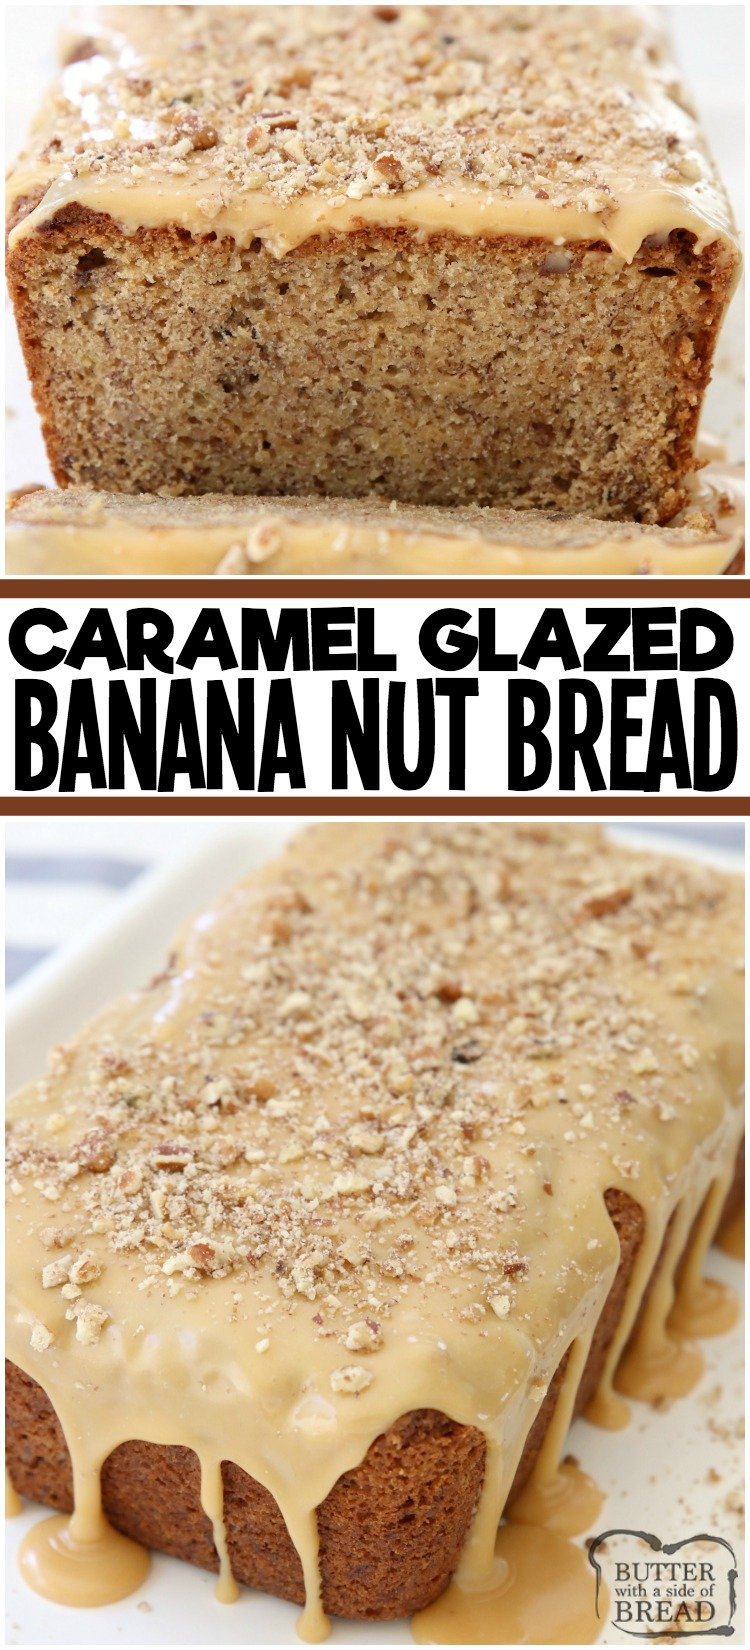 Caramel Banana Nut Bread made with ripe bananas and spiced with cinnamon, nutmeg and ginger. Topped with buttery streusel & caramel glaze. Best Banana Nut Bread recipe ever! #bread #banana #nuts #walnuts #pecans #bananabread #sweetbread #baking #caramel #food #recipe from BUTTER WITH A SIDE OF BREAD